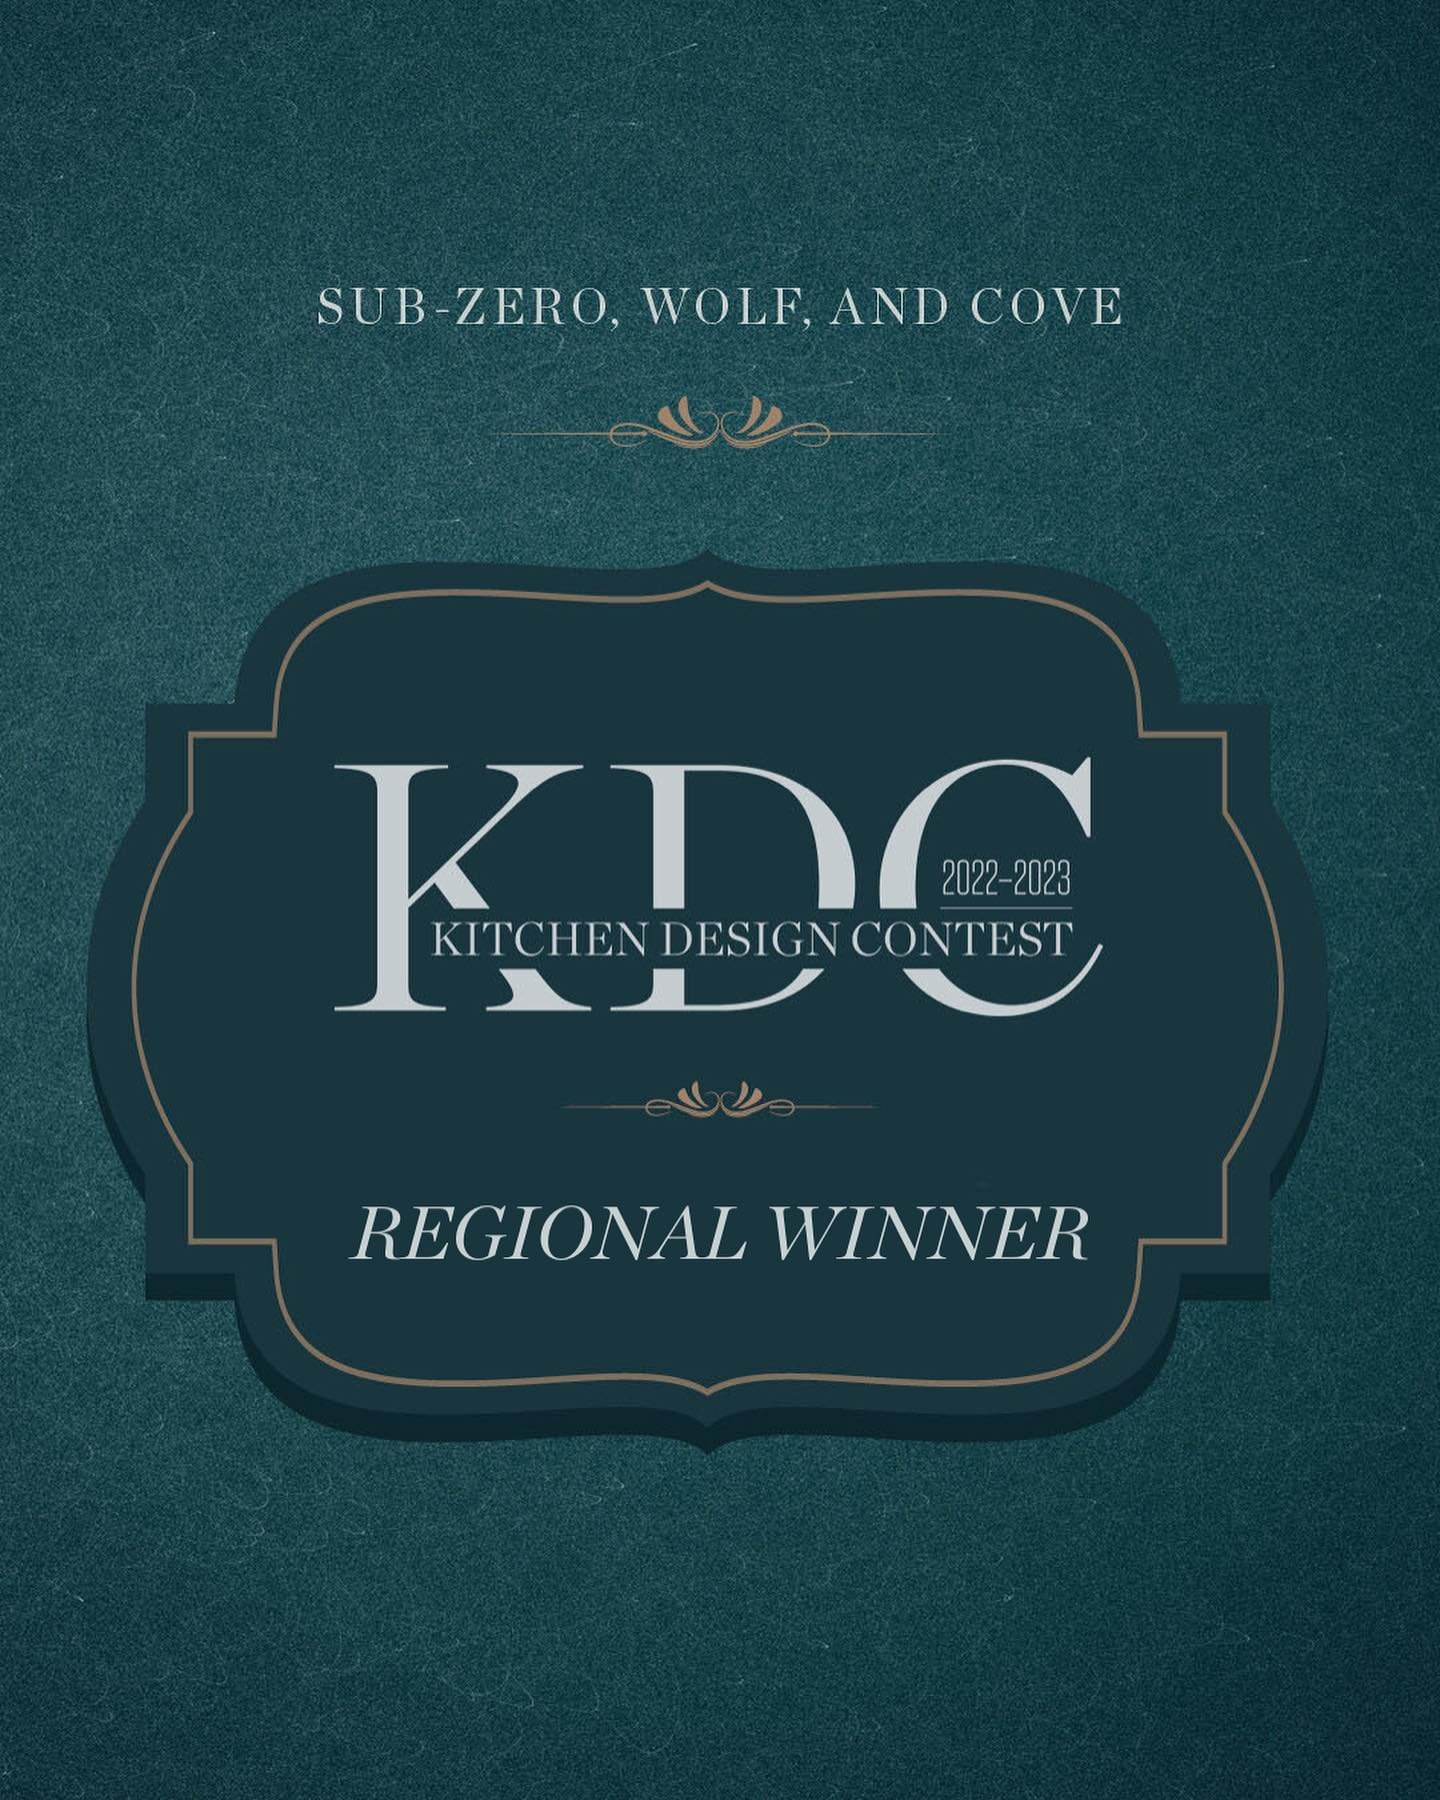 We are so pleased to announce that we have been selected as a top 10 Regional Finalist for the @subzeroandwolf Kitchen Design Contest 2022-2023! We submitted this lovely traditional kitchen and were awarded top 10 spot among tons of entries. Congrats